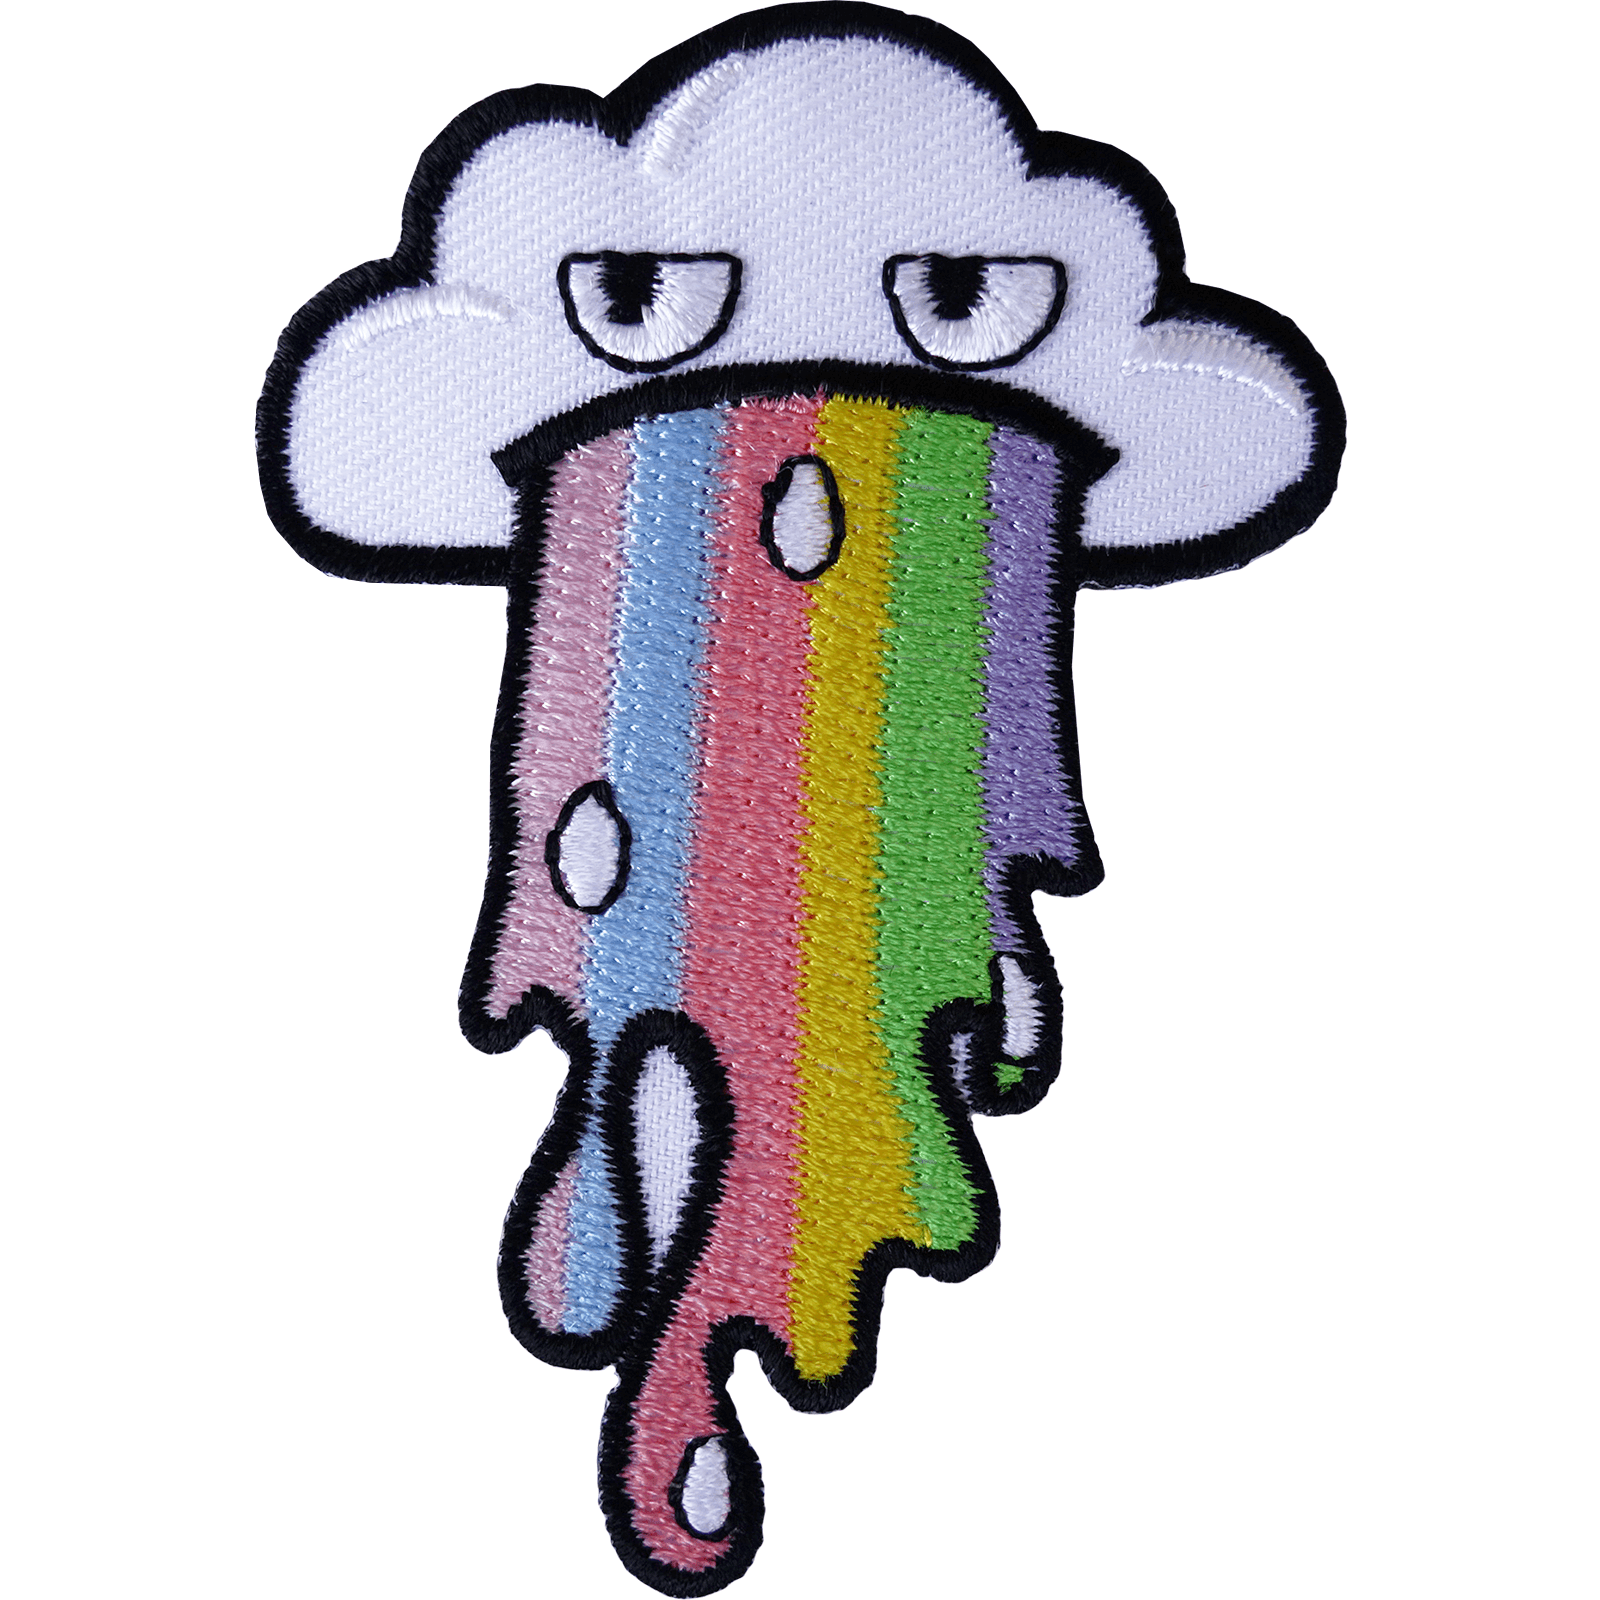 Cloud Sick Rainbow Patch Iron Sew On Embroidered Badge Embroidery Craft Applique